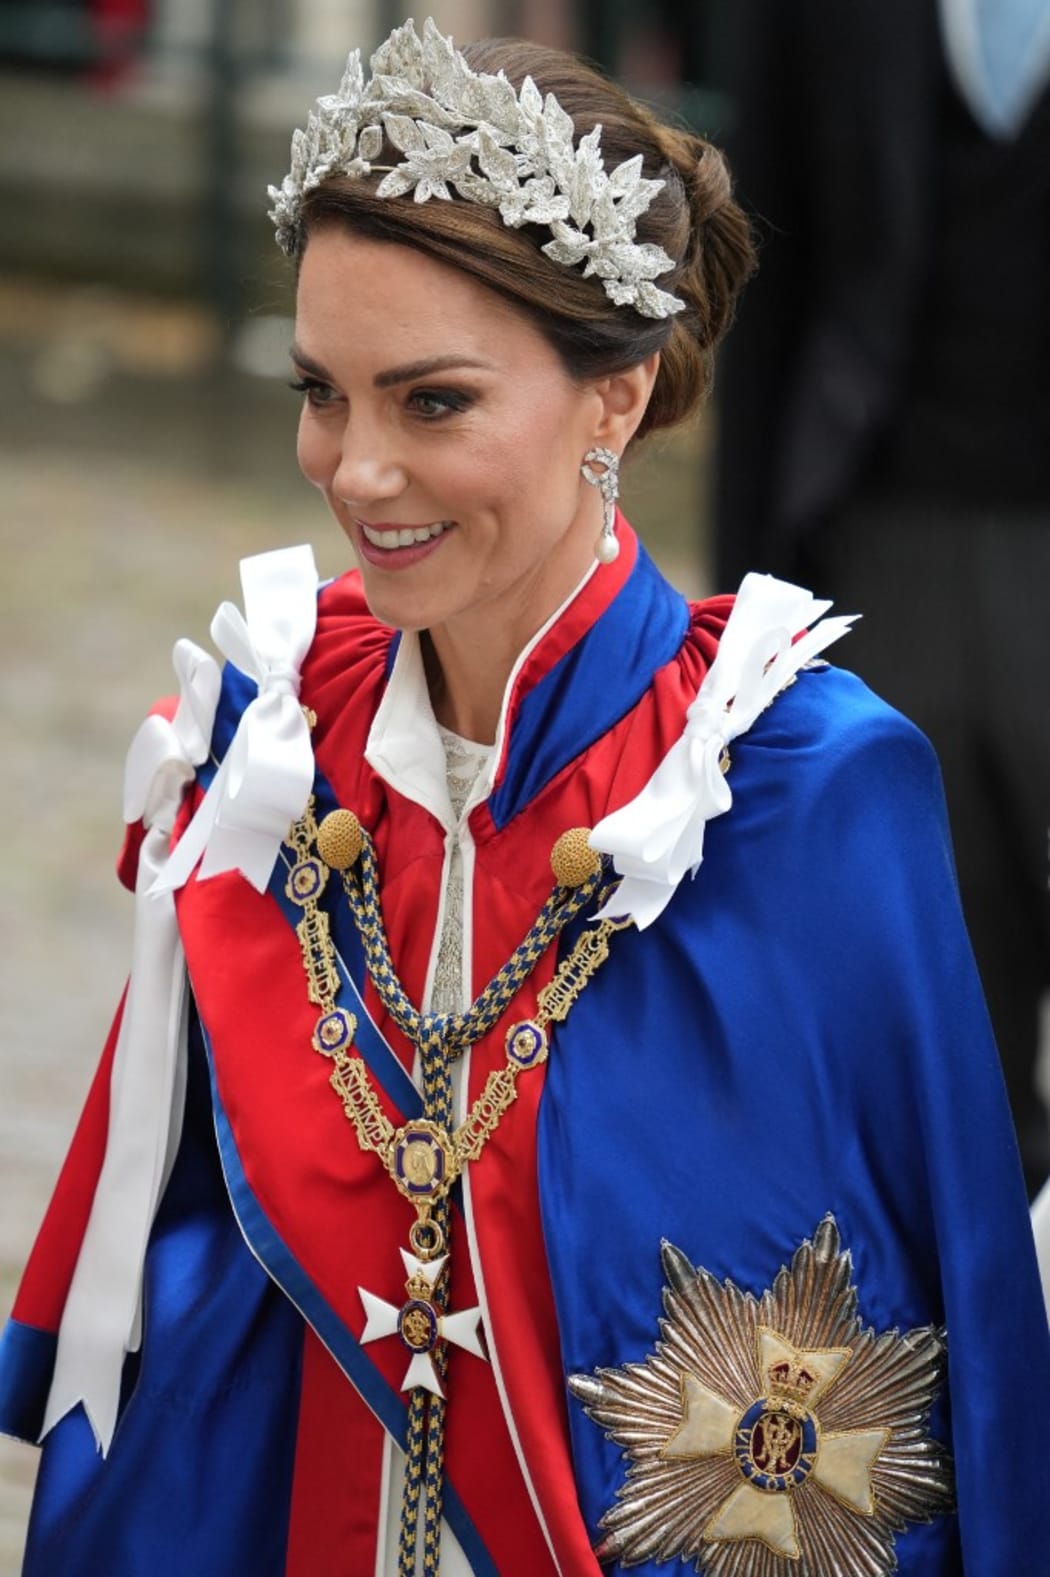 Catherine, Princess of Wales arrives at Westminster Abbey, wearing her formal robes.